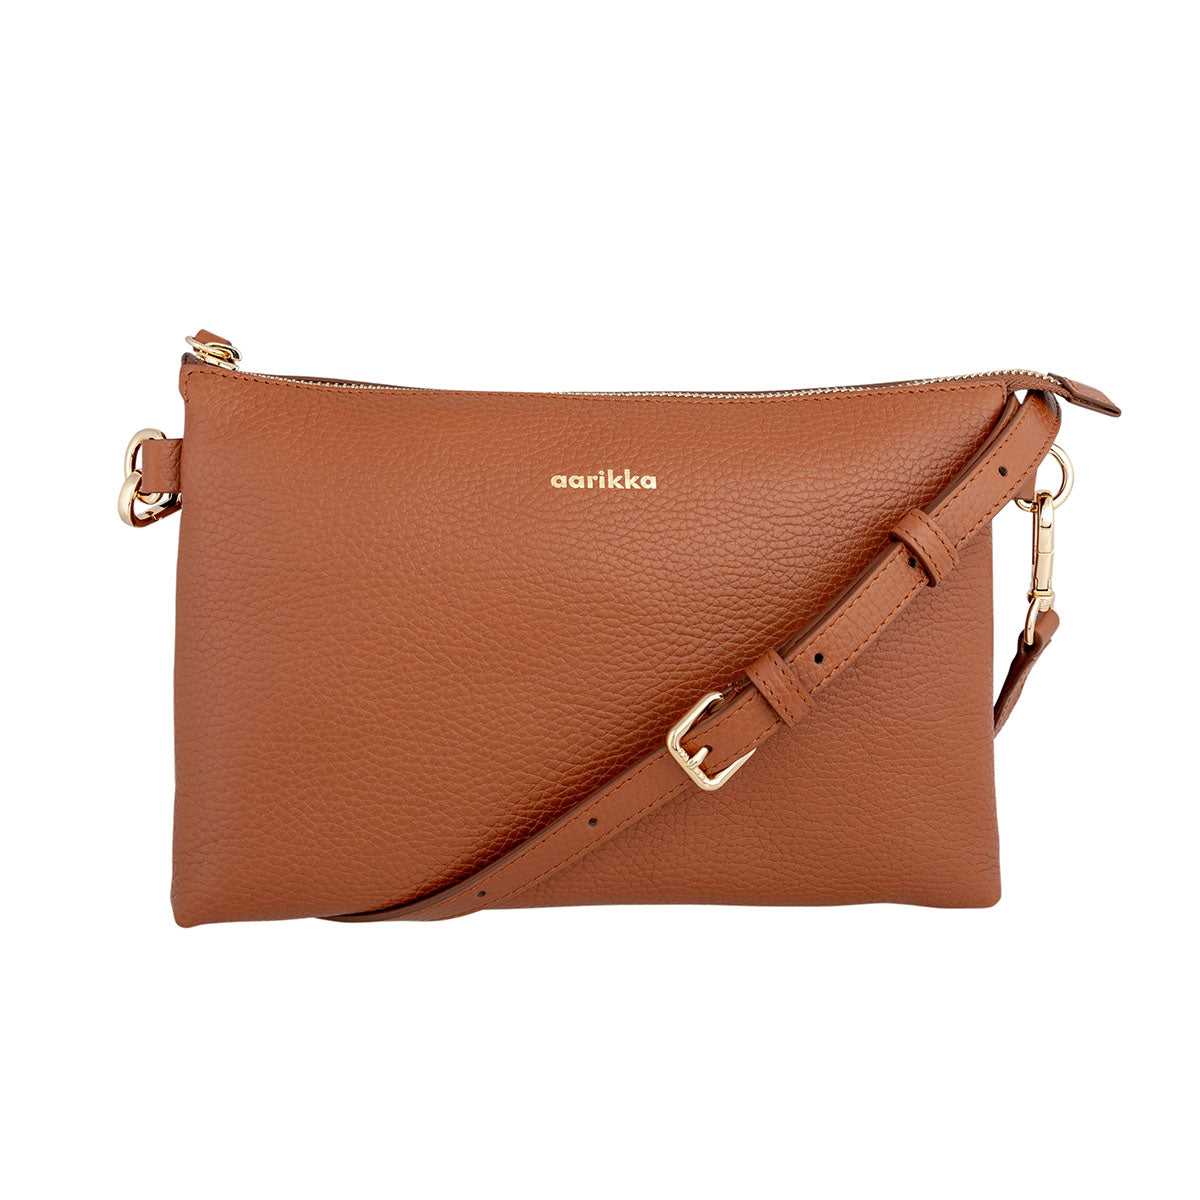 New arrivals: Bags and accessories